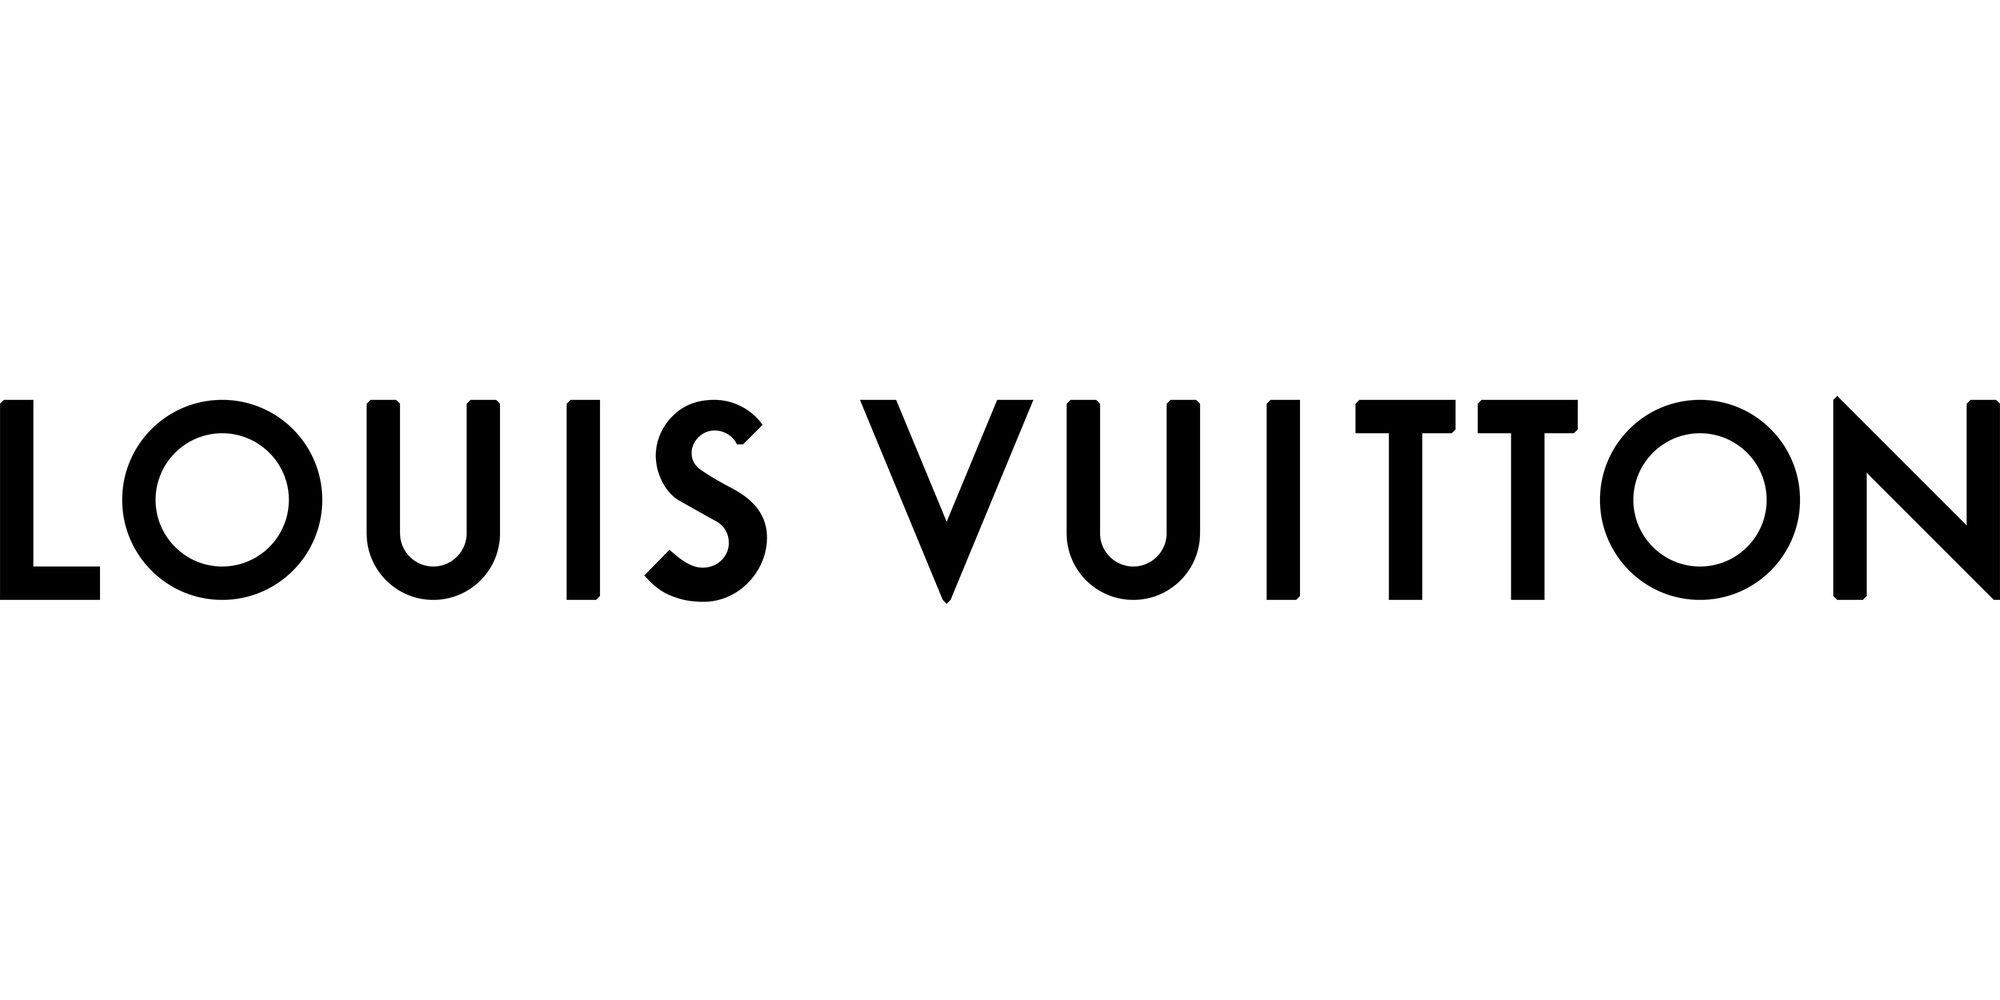 Louis Vuitton Typography #blackletter #typo #typography #lettering